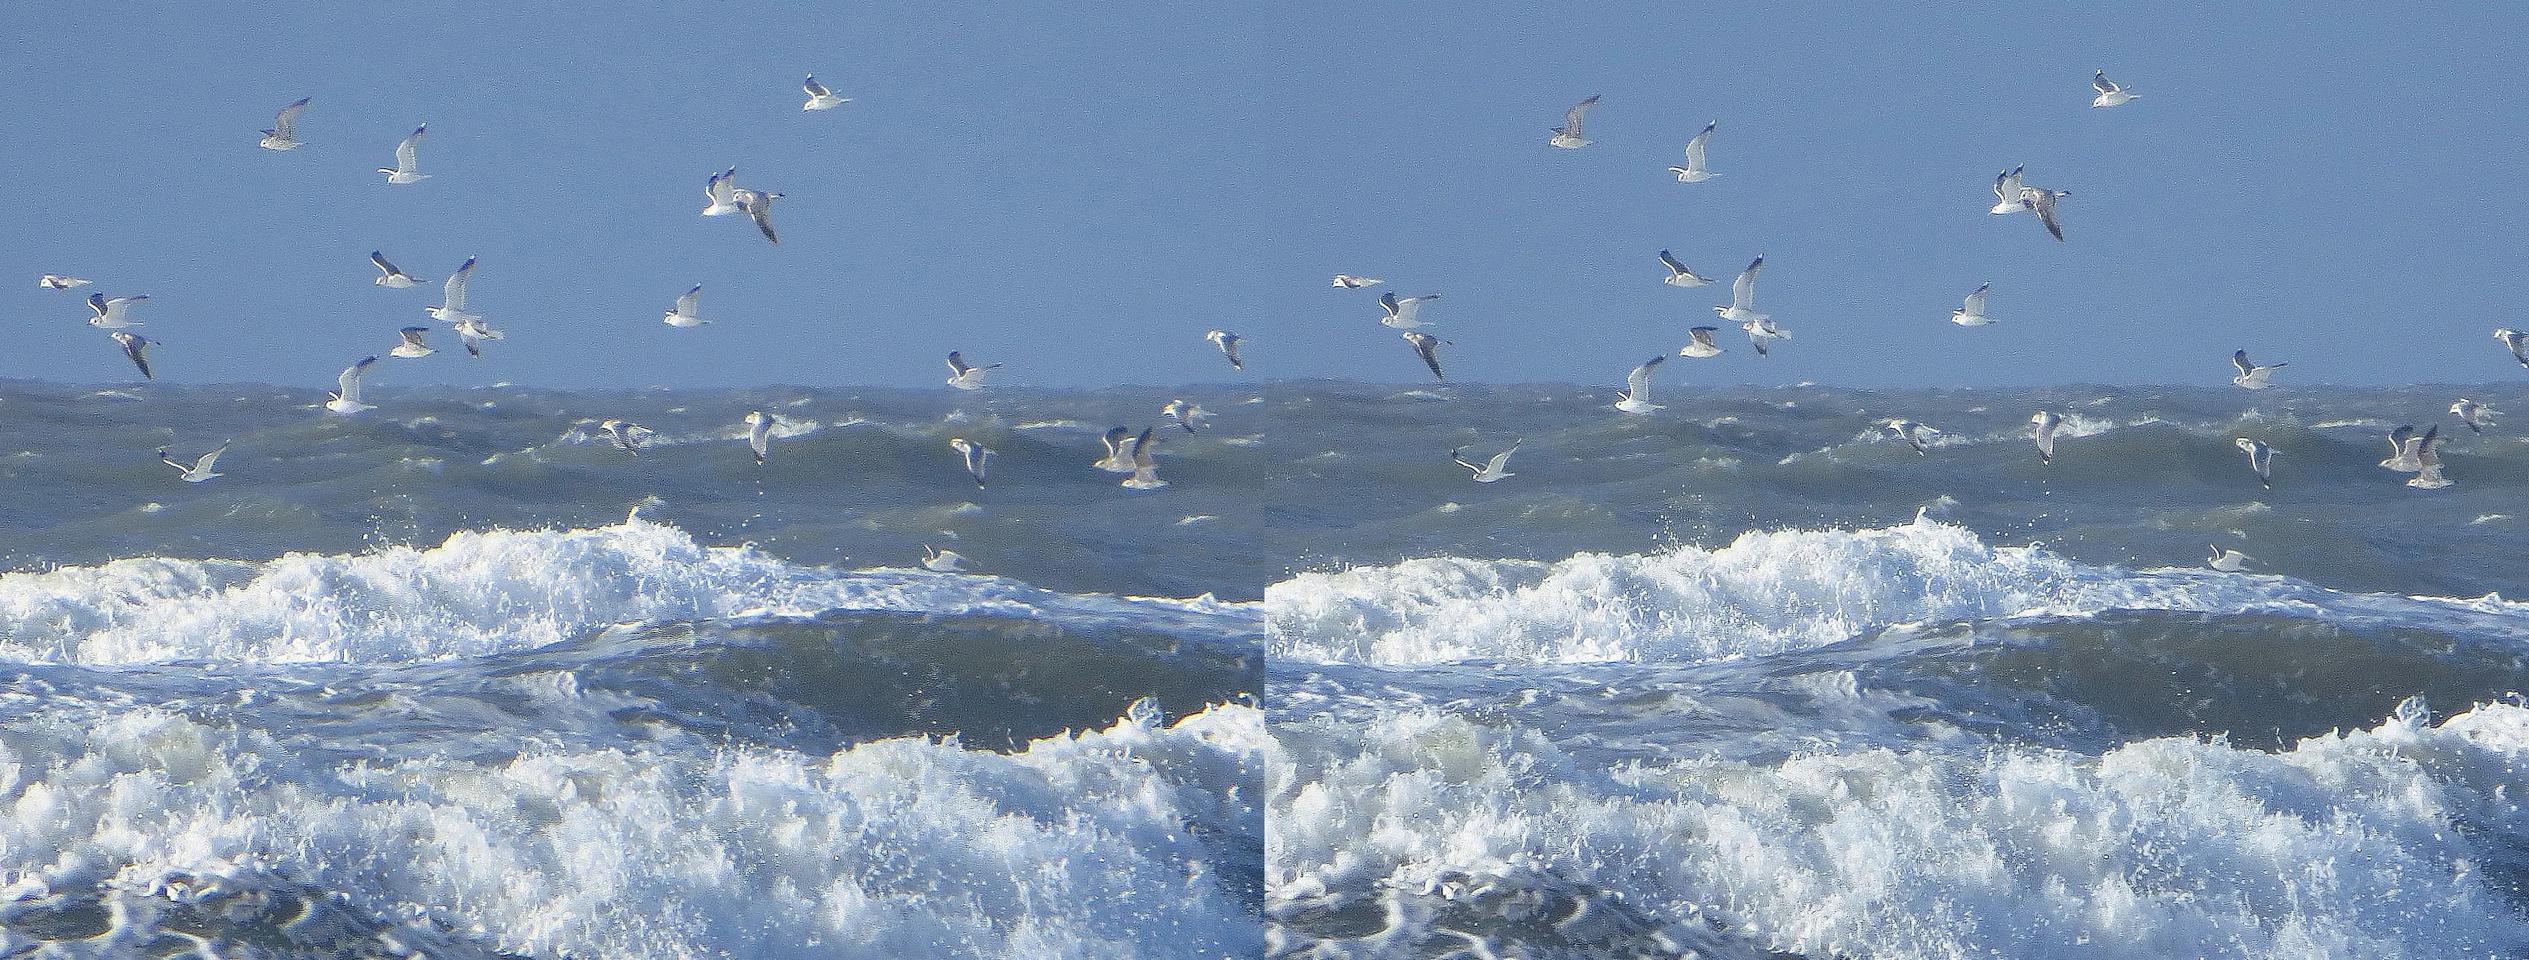 Strong breakers with seagulls